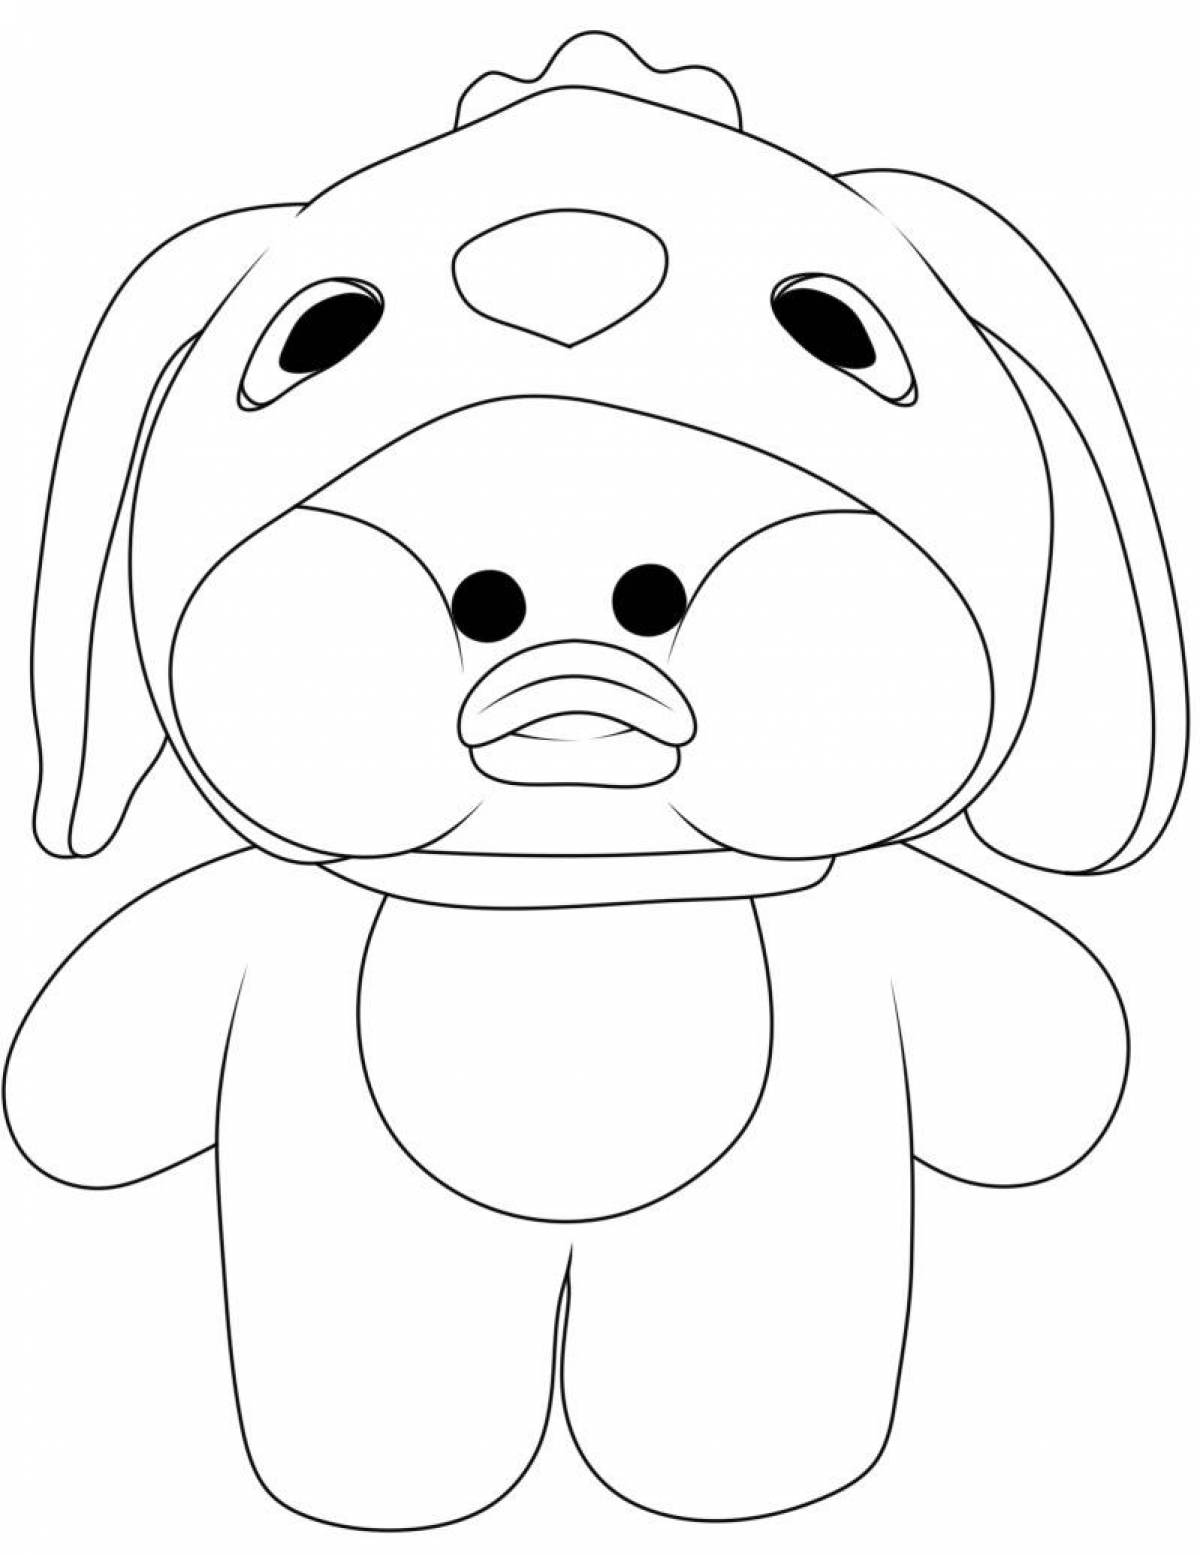 Lalafanfan's delightful duck coloring page